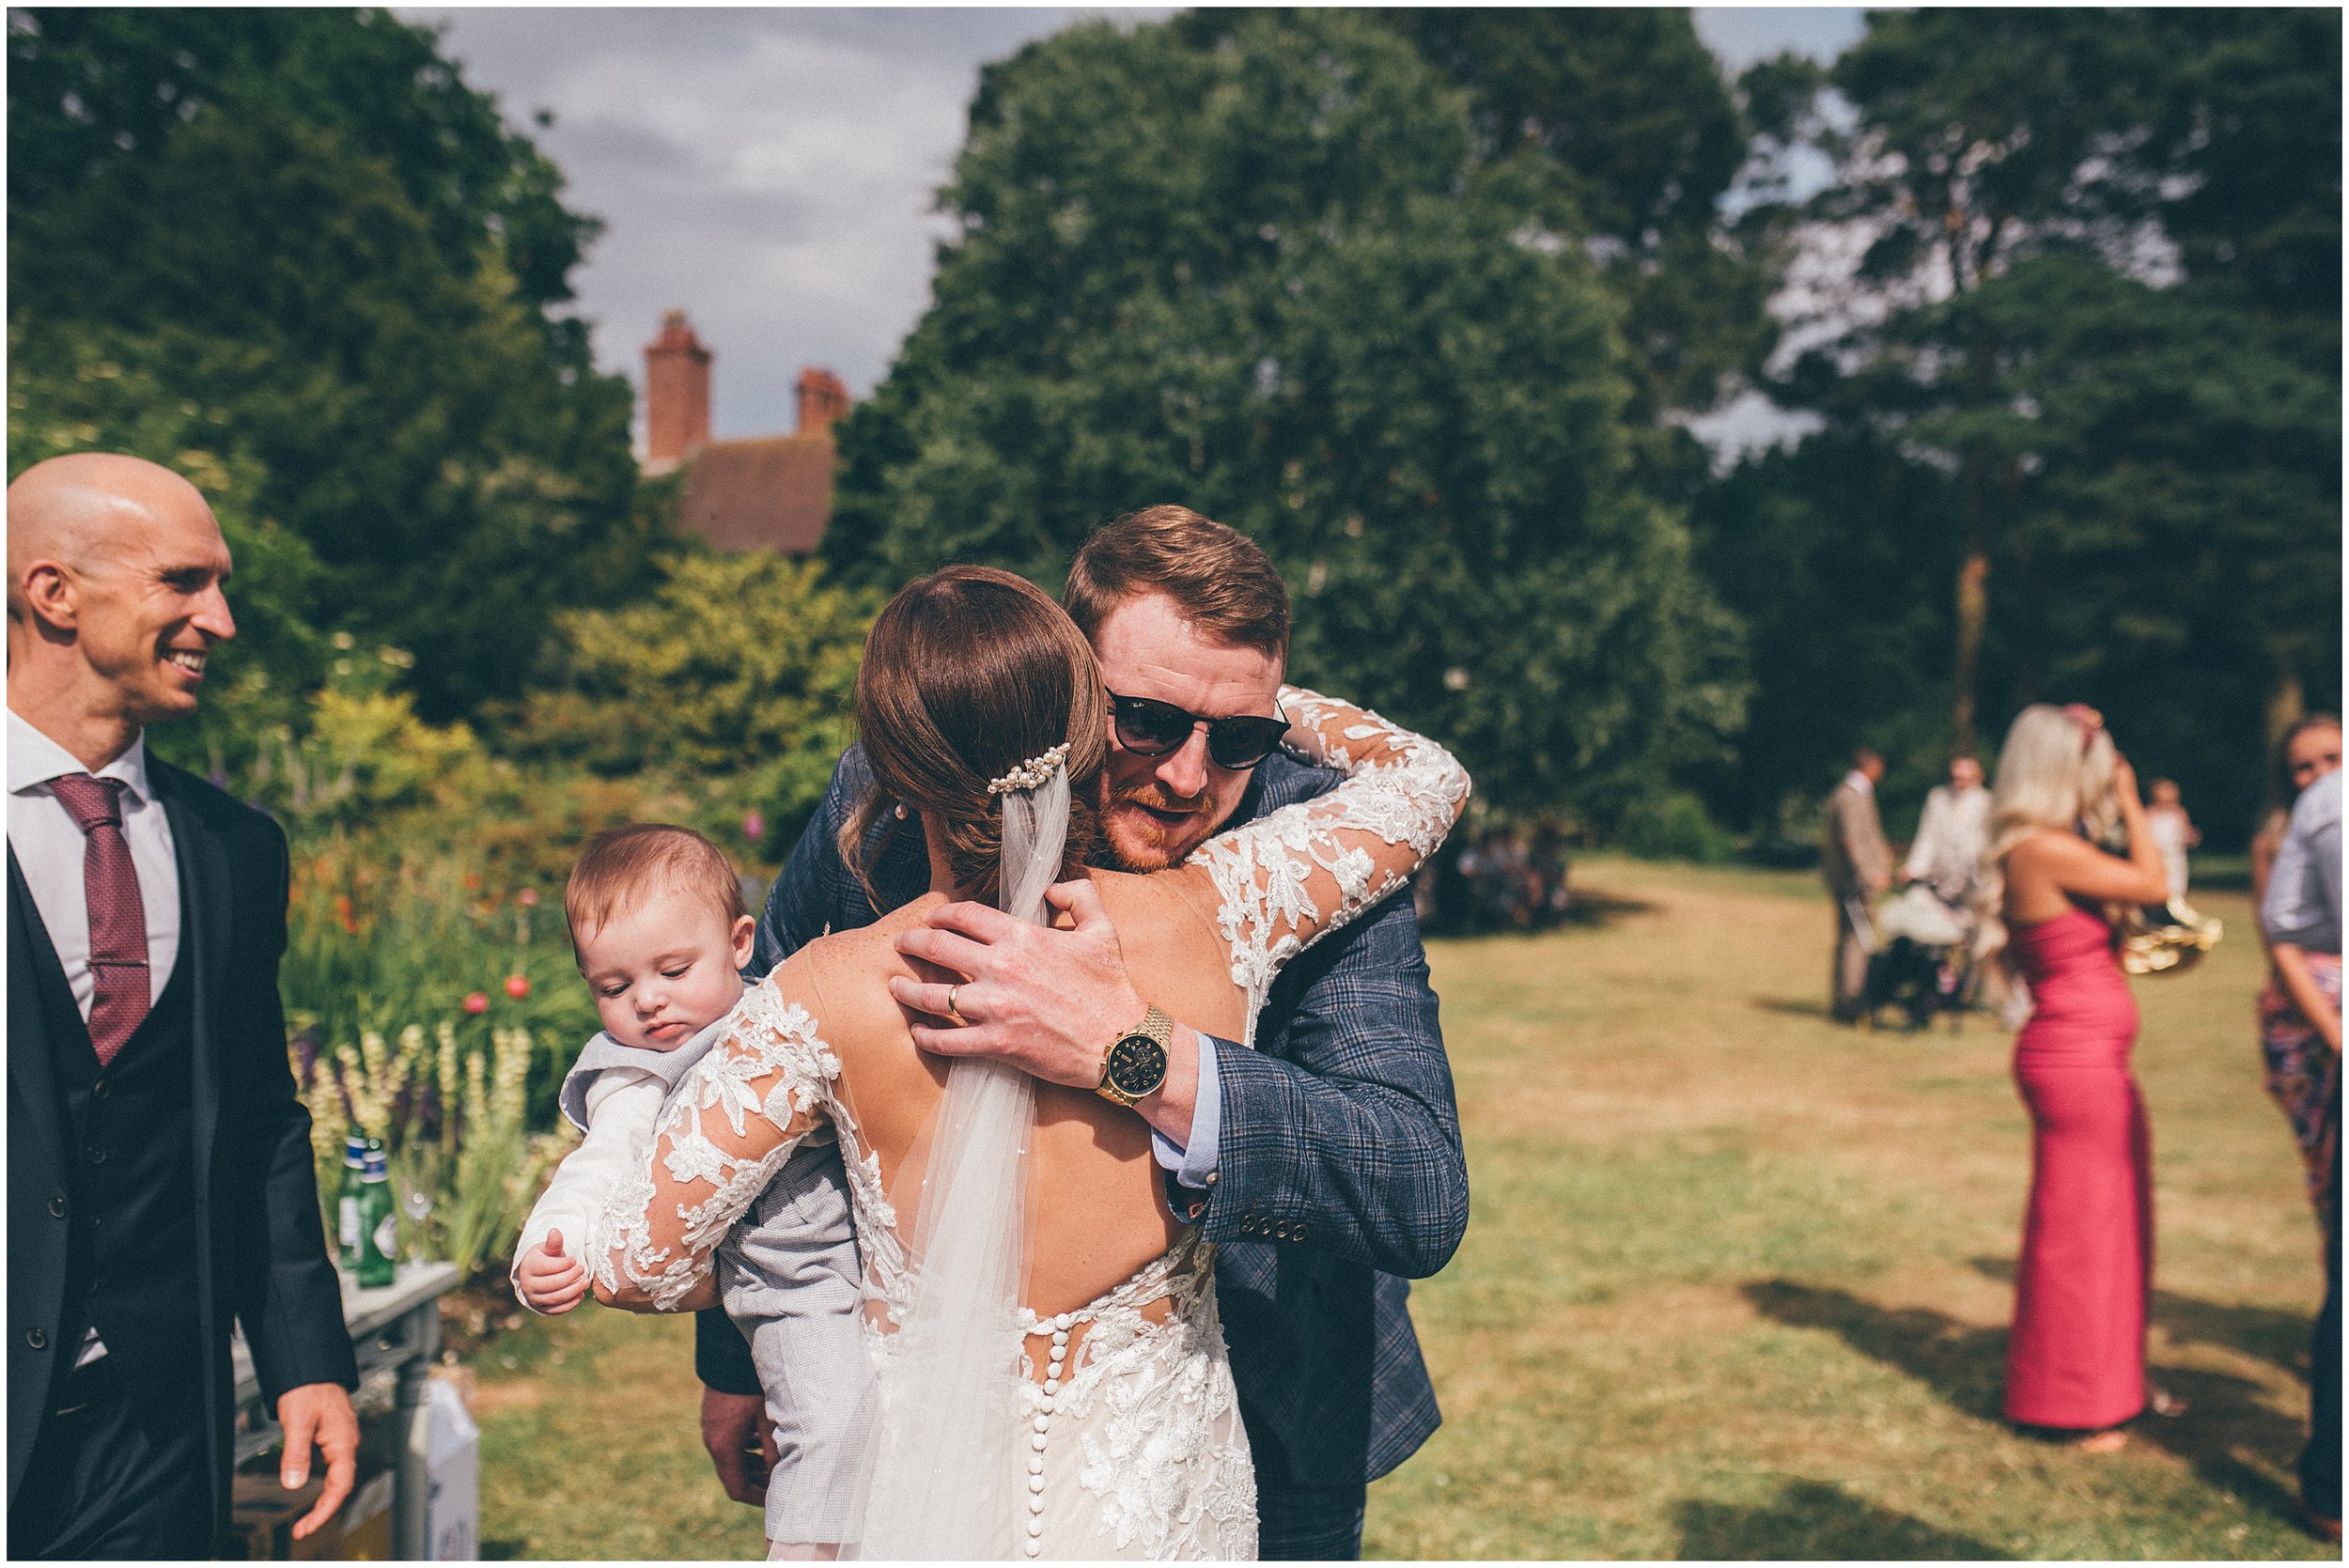 Wedding guests enjoy the beautiful gardens at Abbeywood Estate in Delamere, Cheshire for a summer wedding reception.